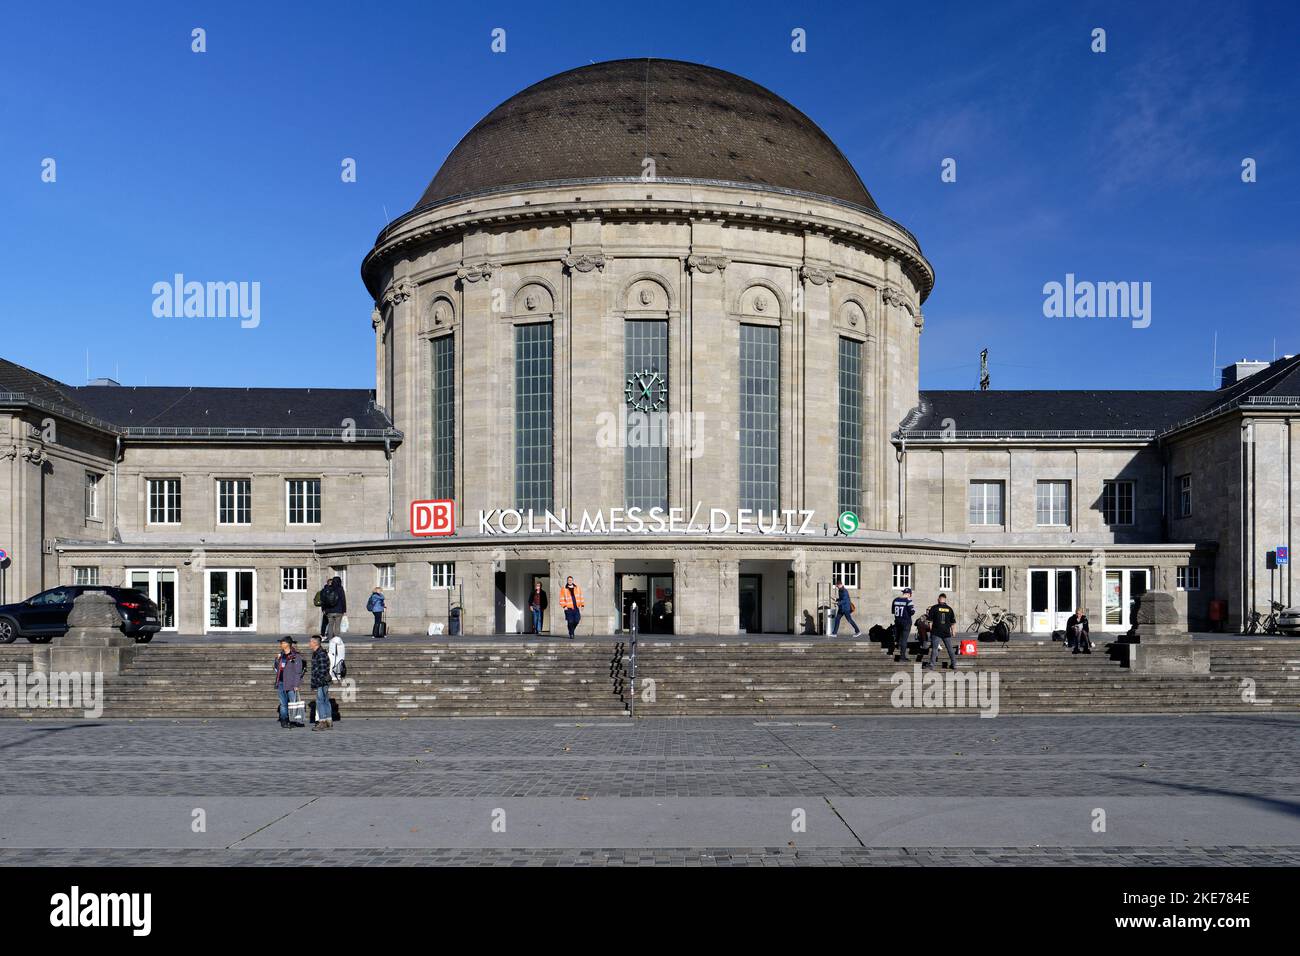 Cologne, Germany, November 10 2022: historic station building Messe/Deutz nearby the cologne exhibition centre Stock Photo